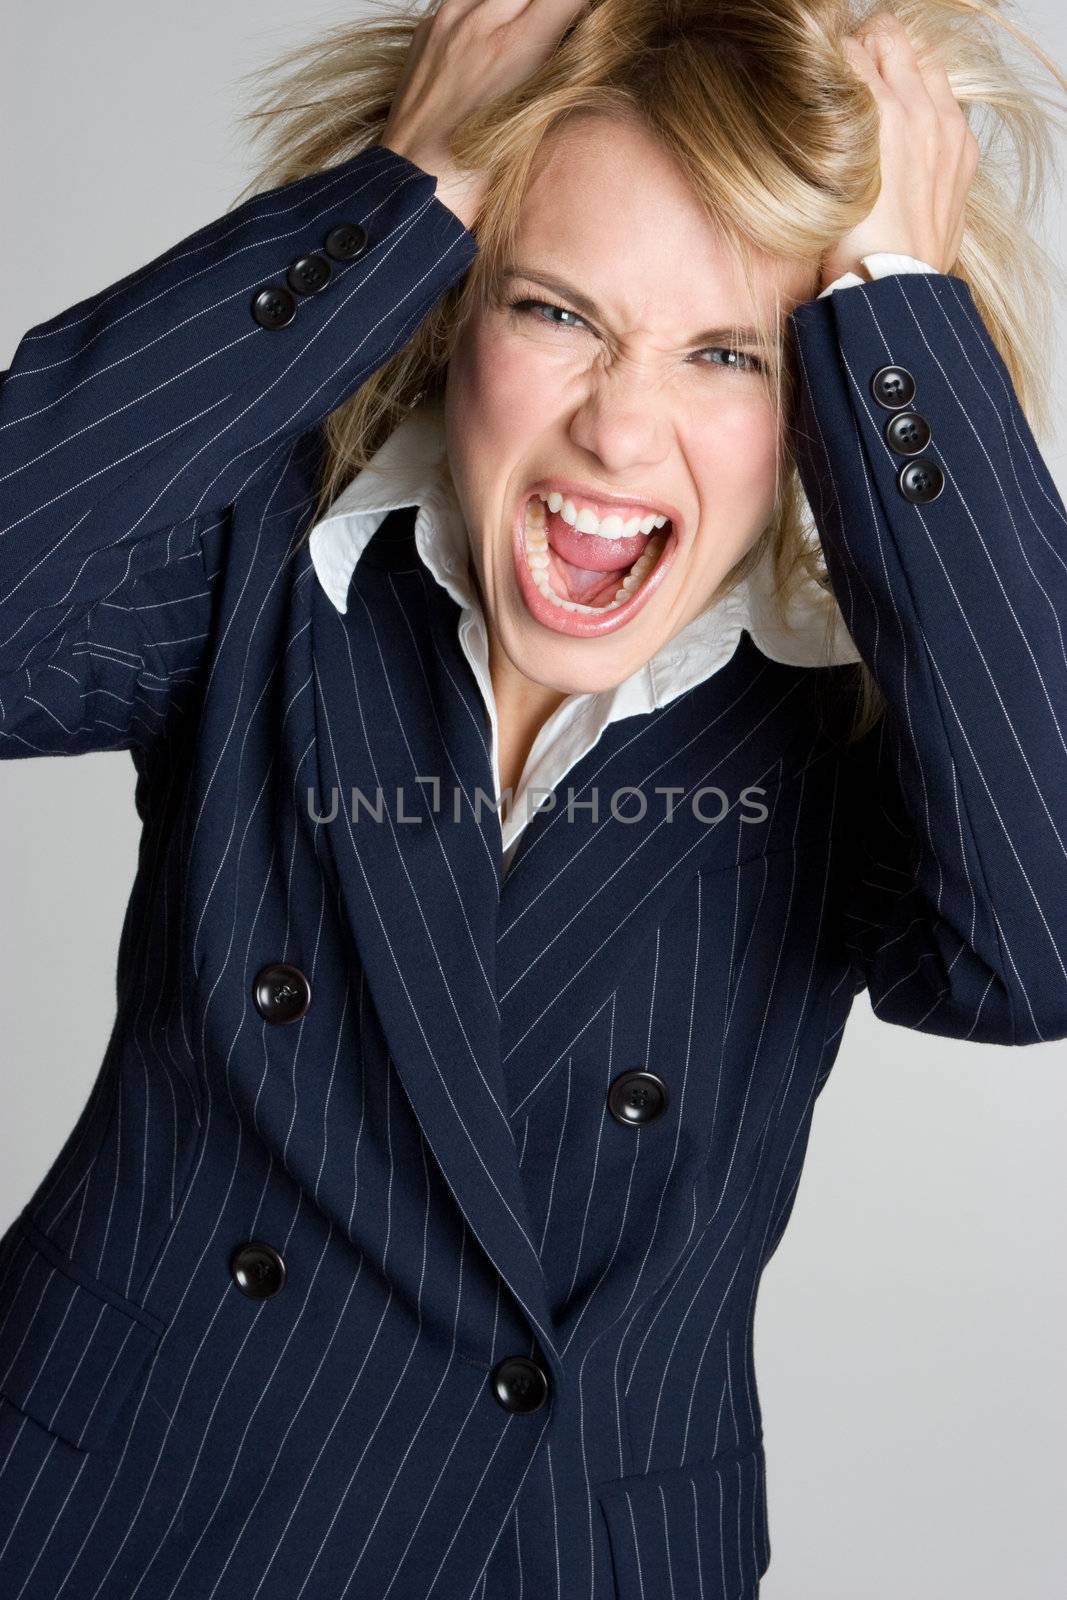 Angry Businesswoman by keeweeboy